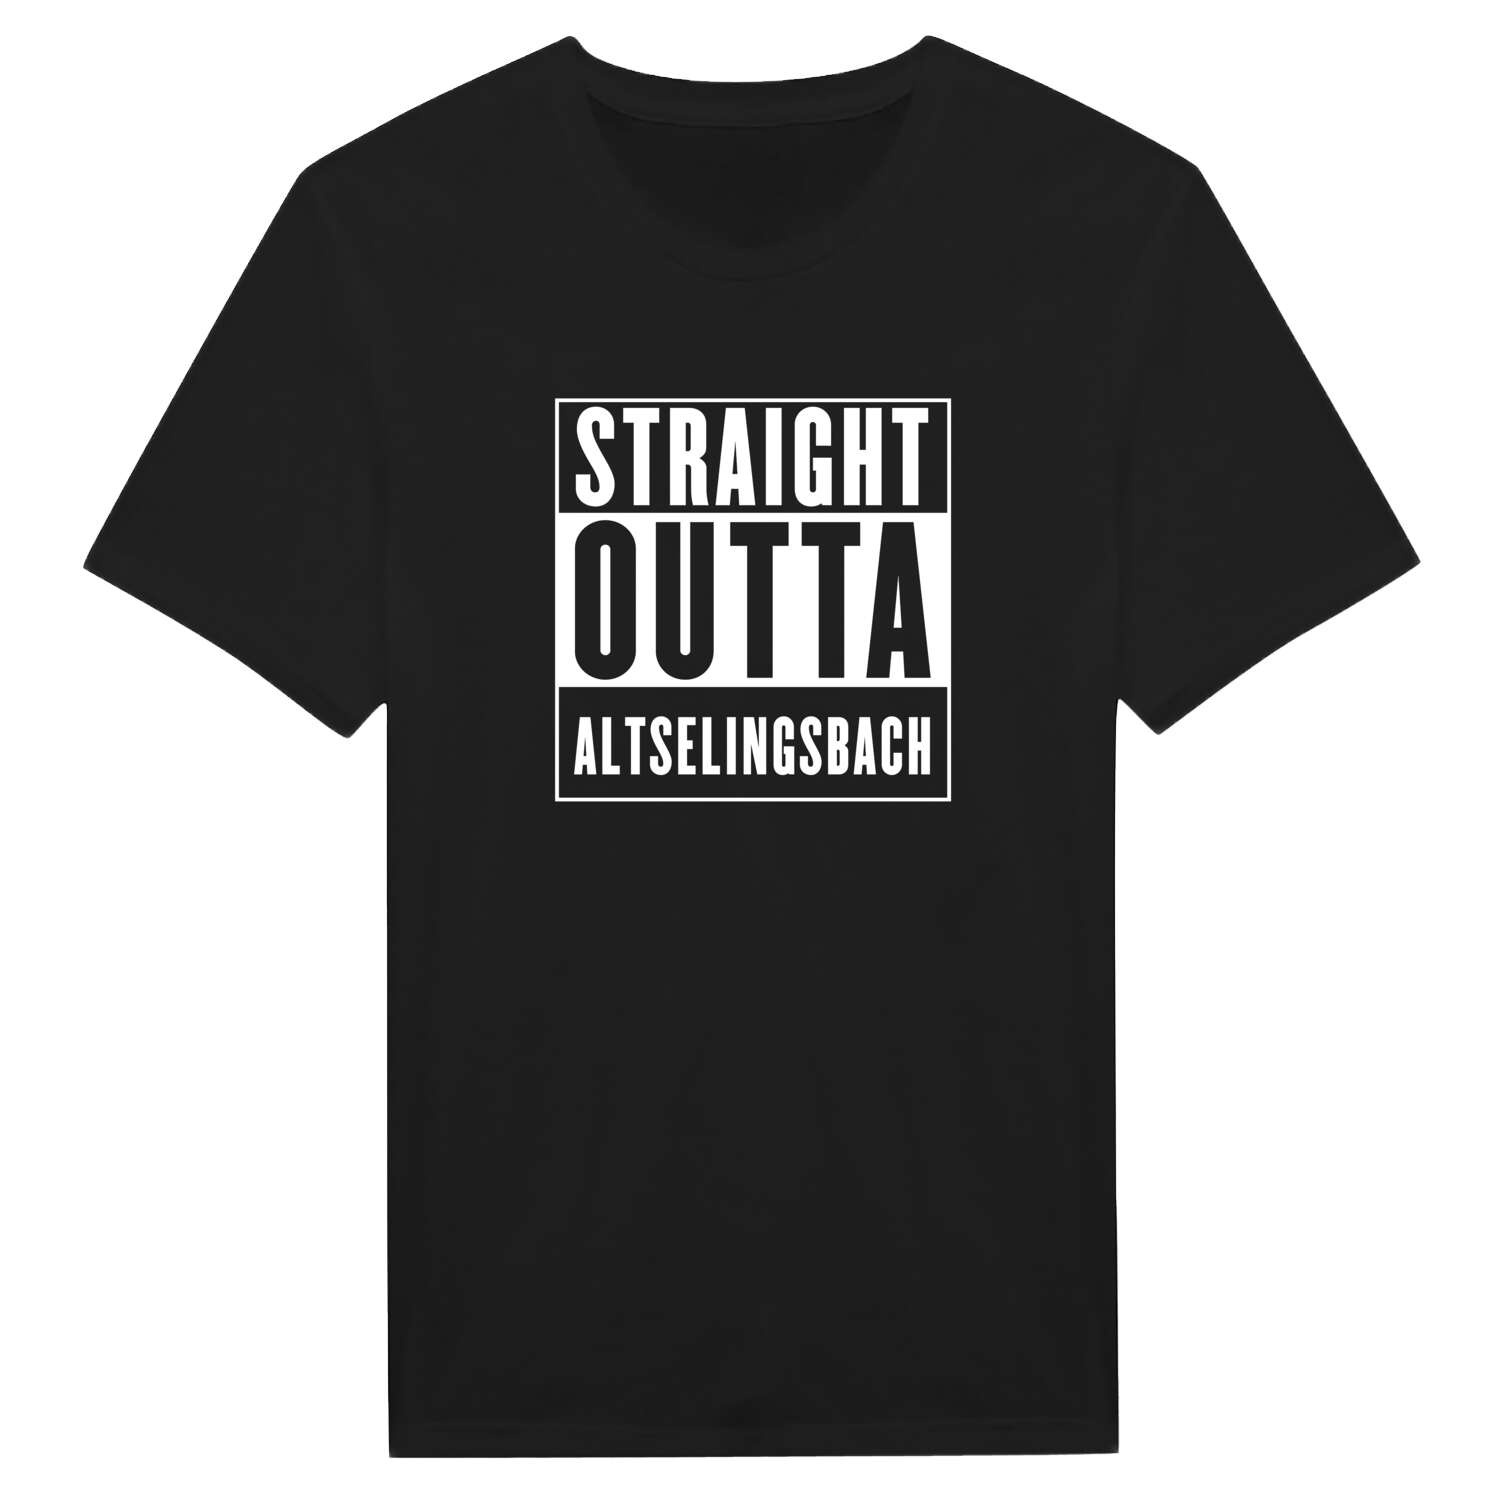 Altselingsbach T-Shirt »Straight Outta«